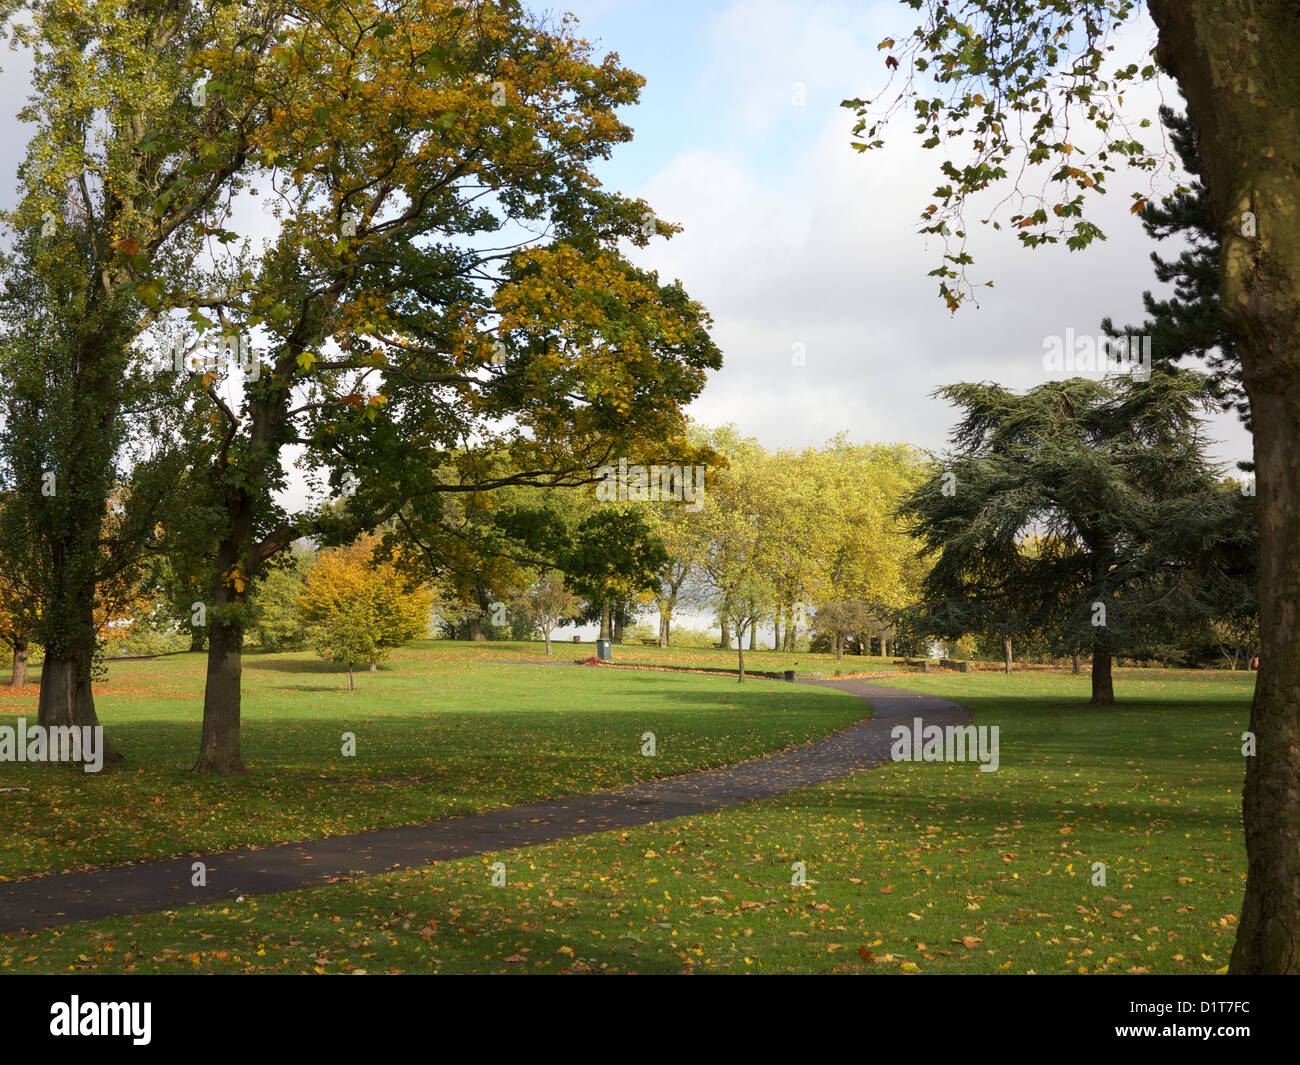 Landscape of Roundwood park in NW, London, UK, with trees and sunshine Stock Photo